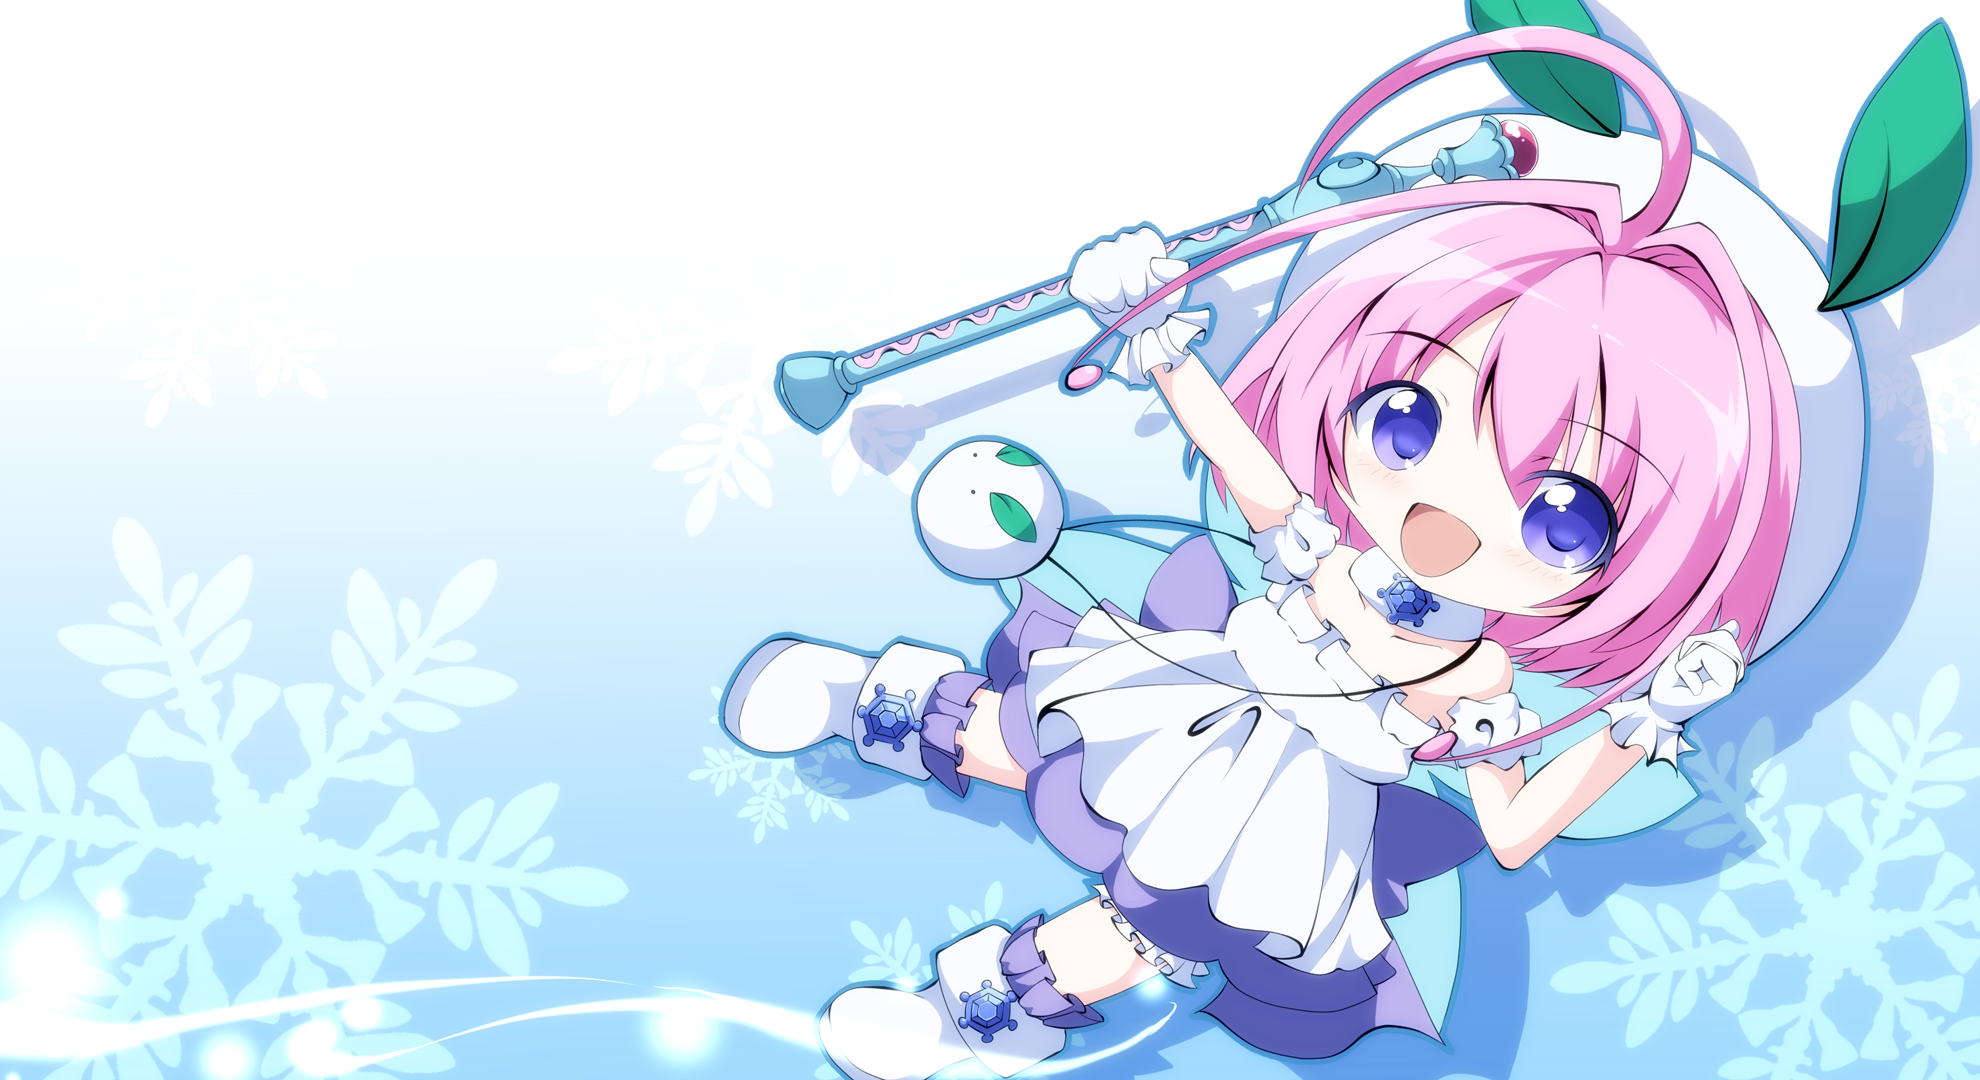 Anime A Little Snow Fairy Sugar HD Wallpaper | Background Image